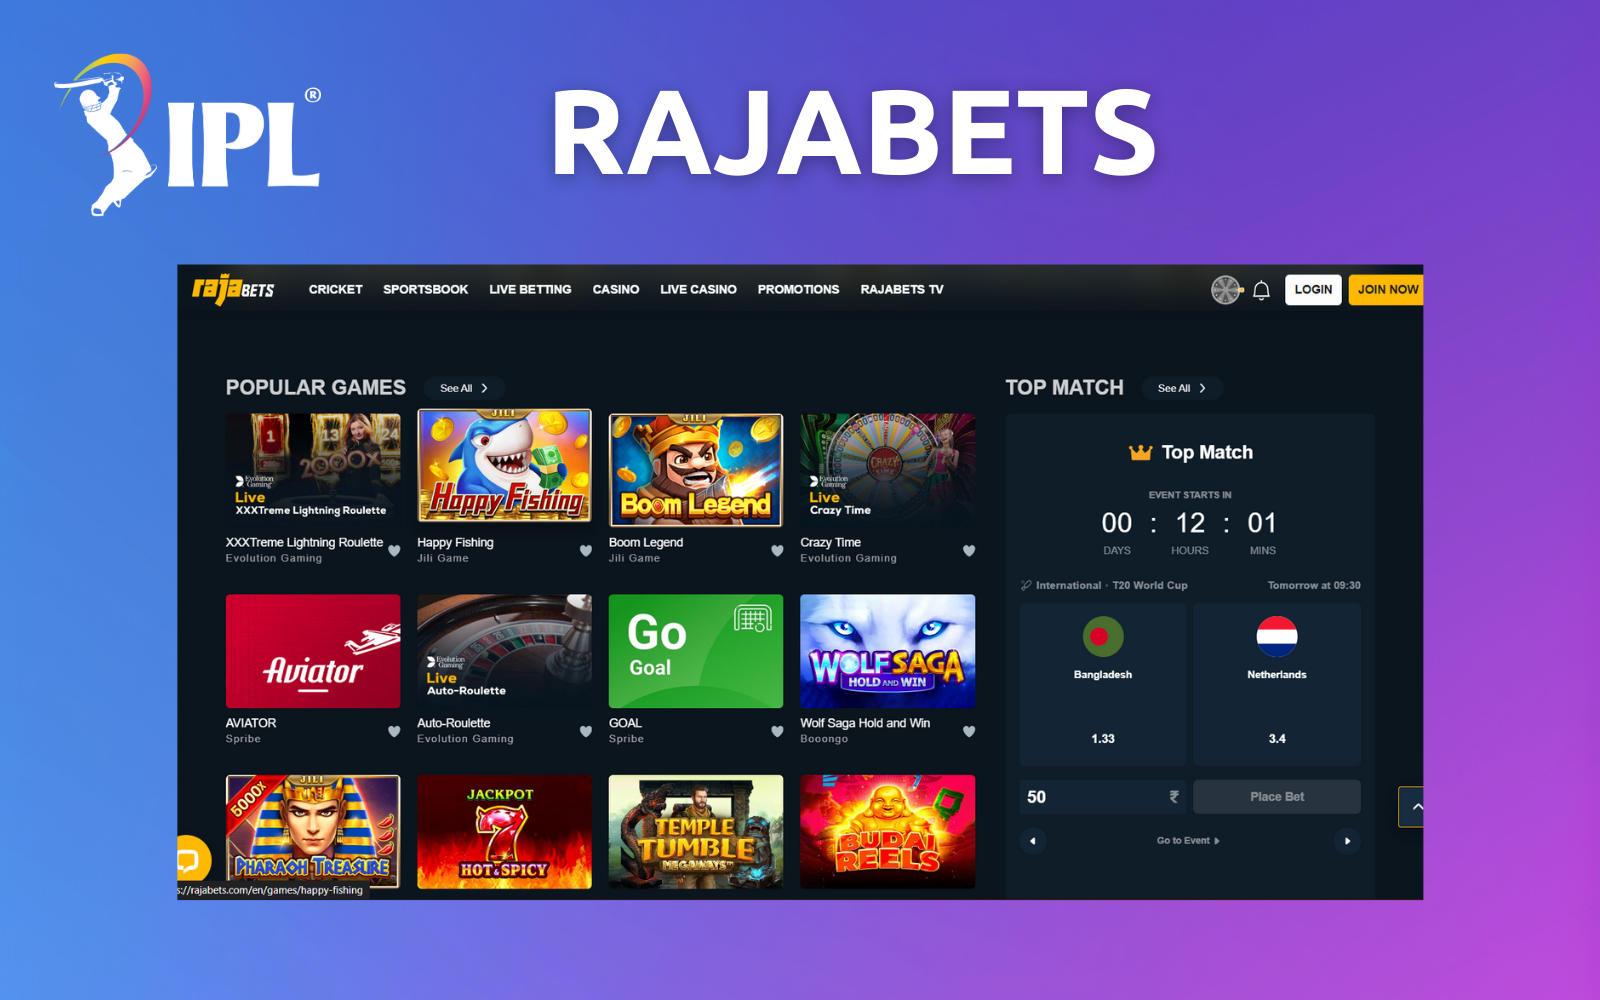 What is Rajabets?